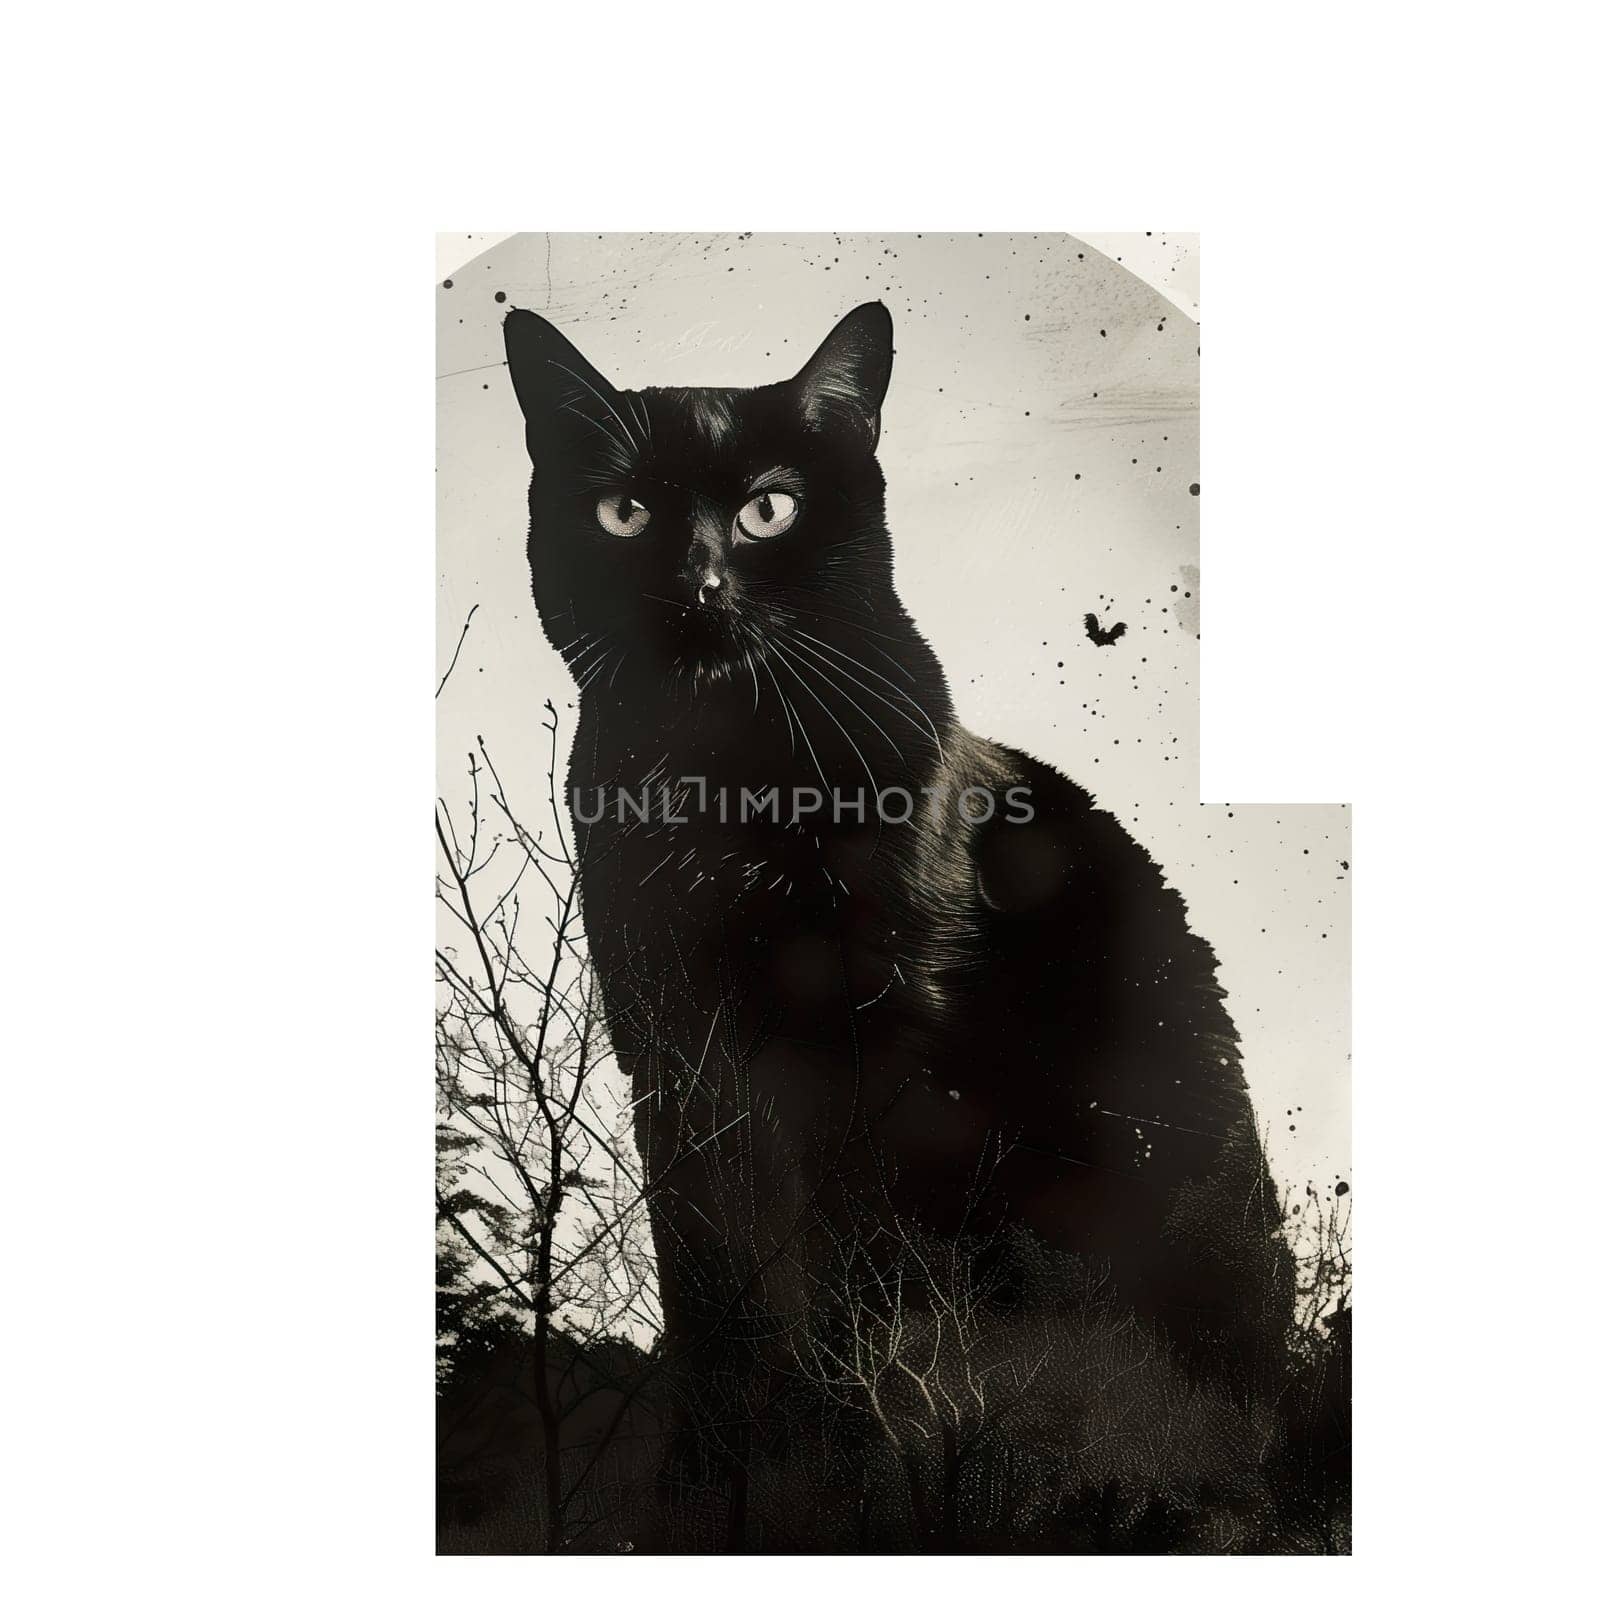 Monochrome vintage photo of halloween Cat cut out image by Dustick